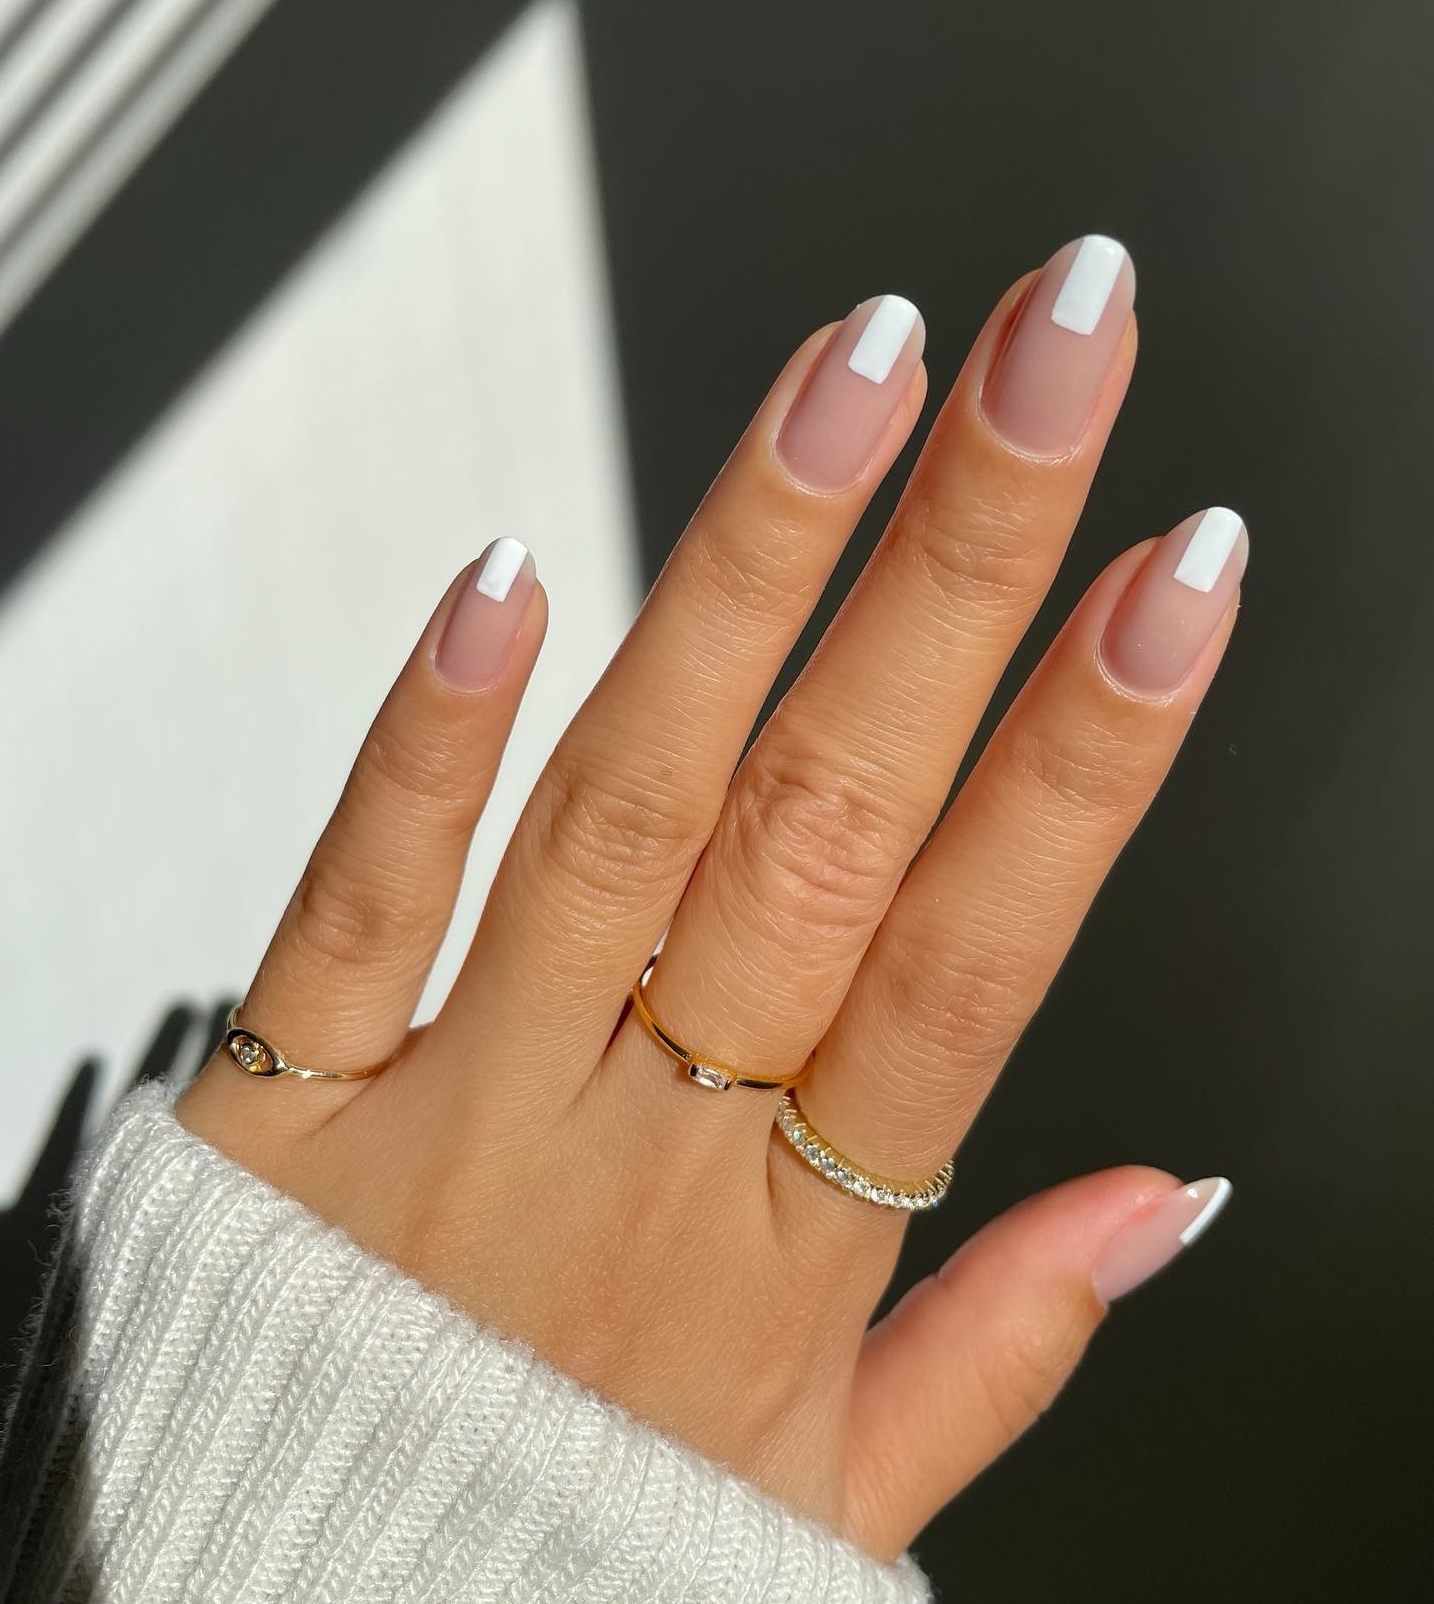 43 Stunning White Coffin Nails Designs  GlamiVibe